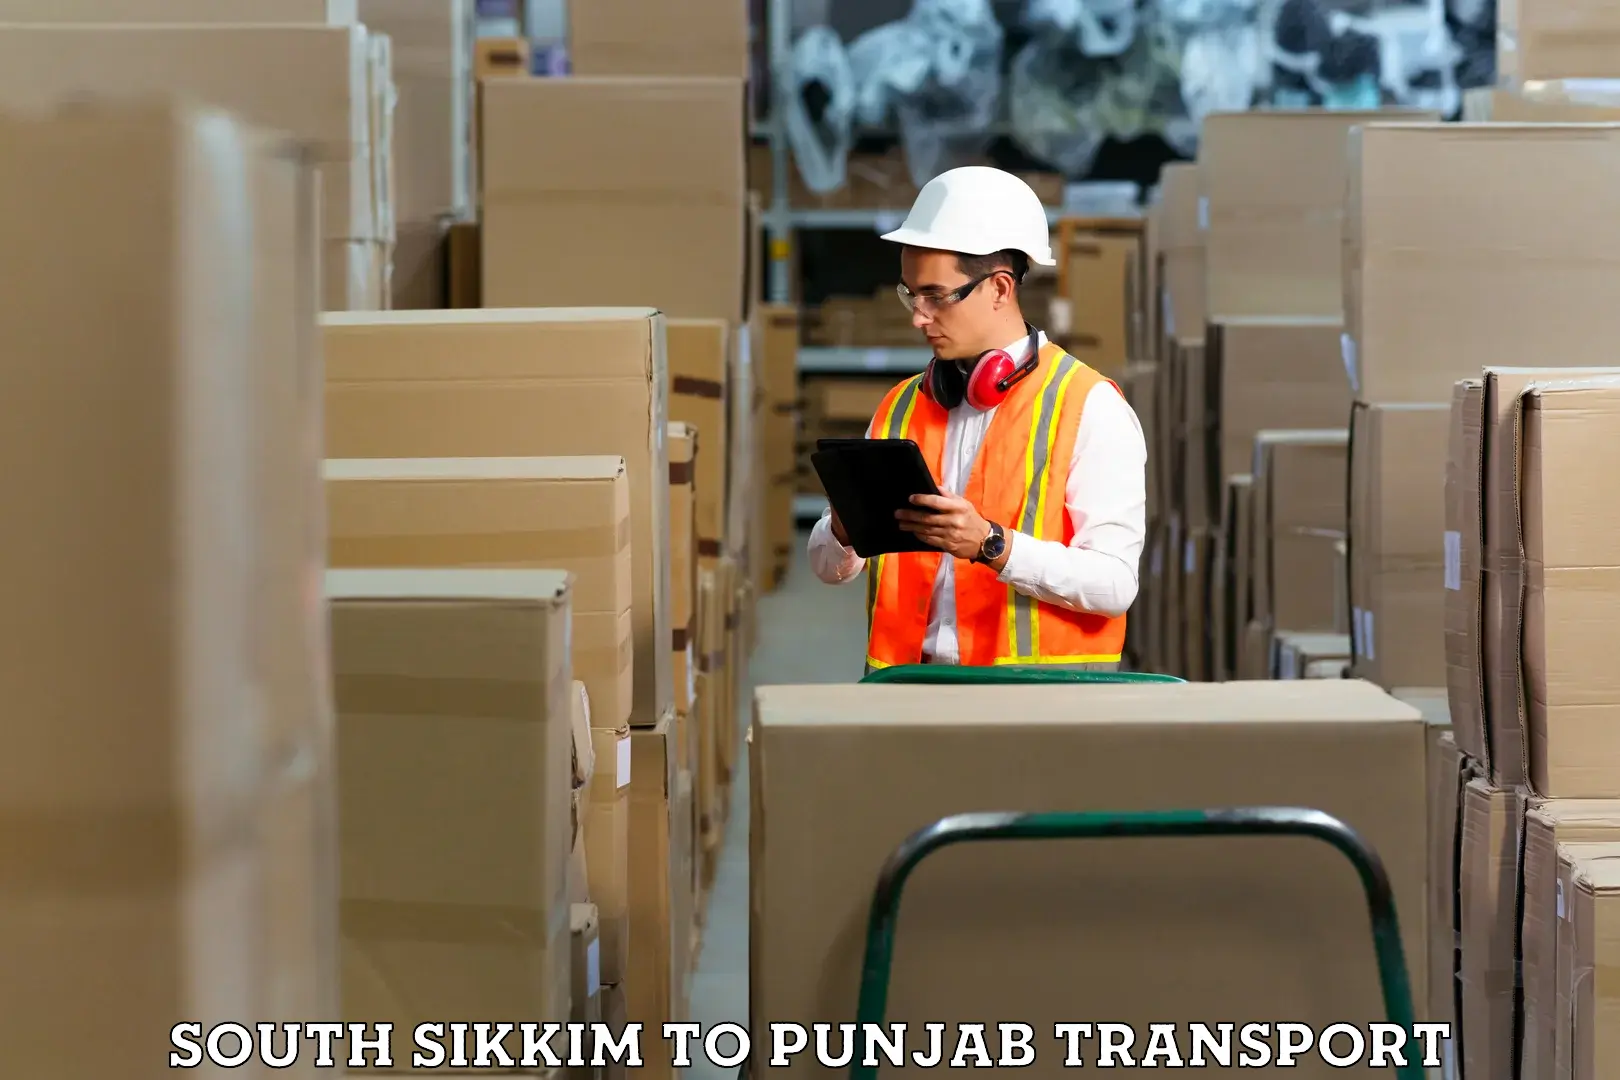 Container transport service South Sikkim to Sultanpur Lodhi